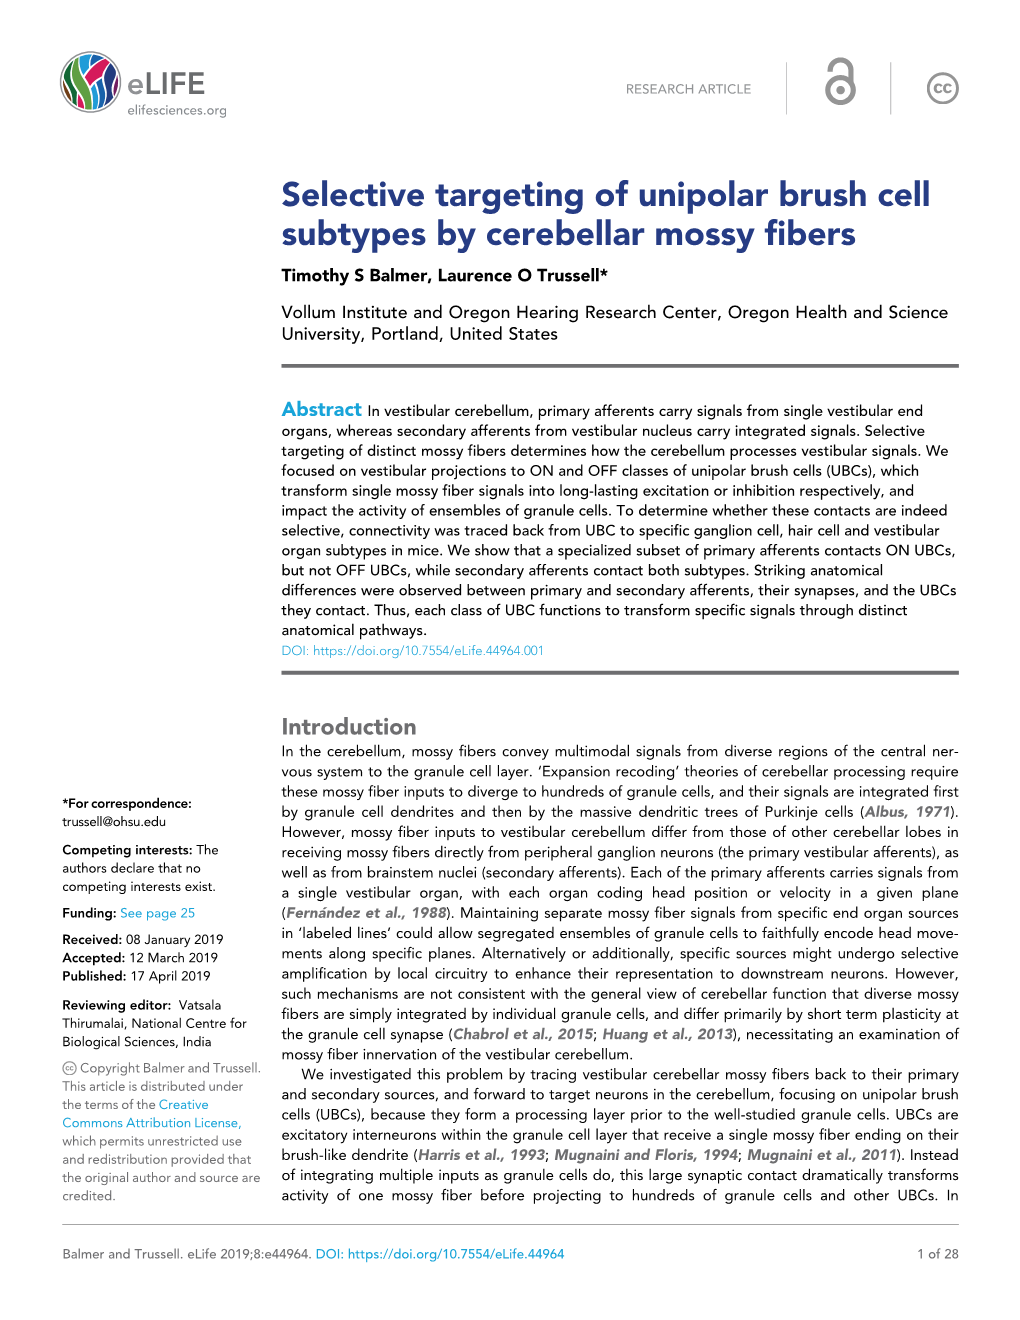 Selective Targeting of Unipolar Brush Cell Subtypes by Cerebellar Mossy Fibers Timothy S Balmer, Laurence O Trussell*